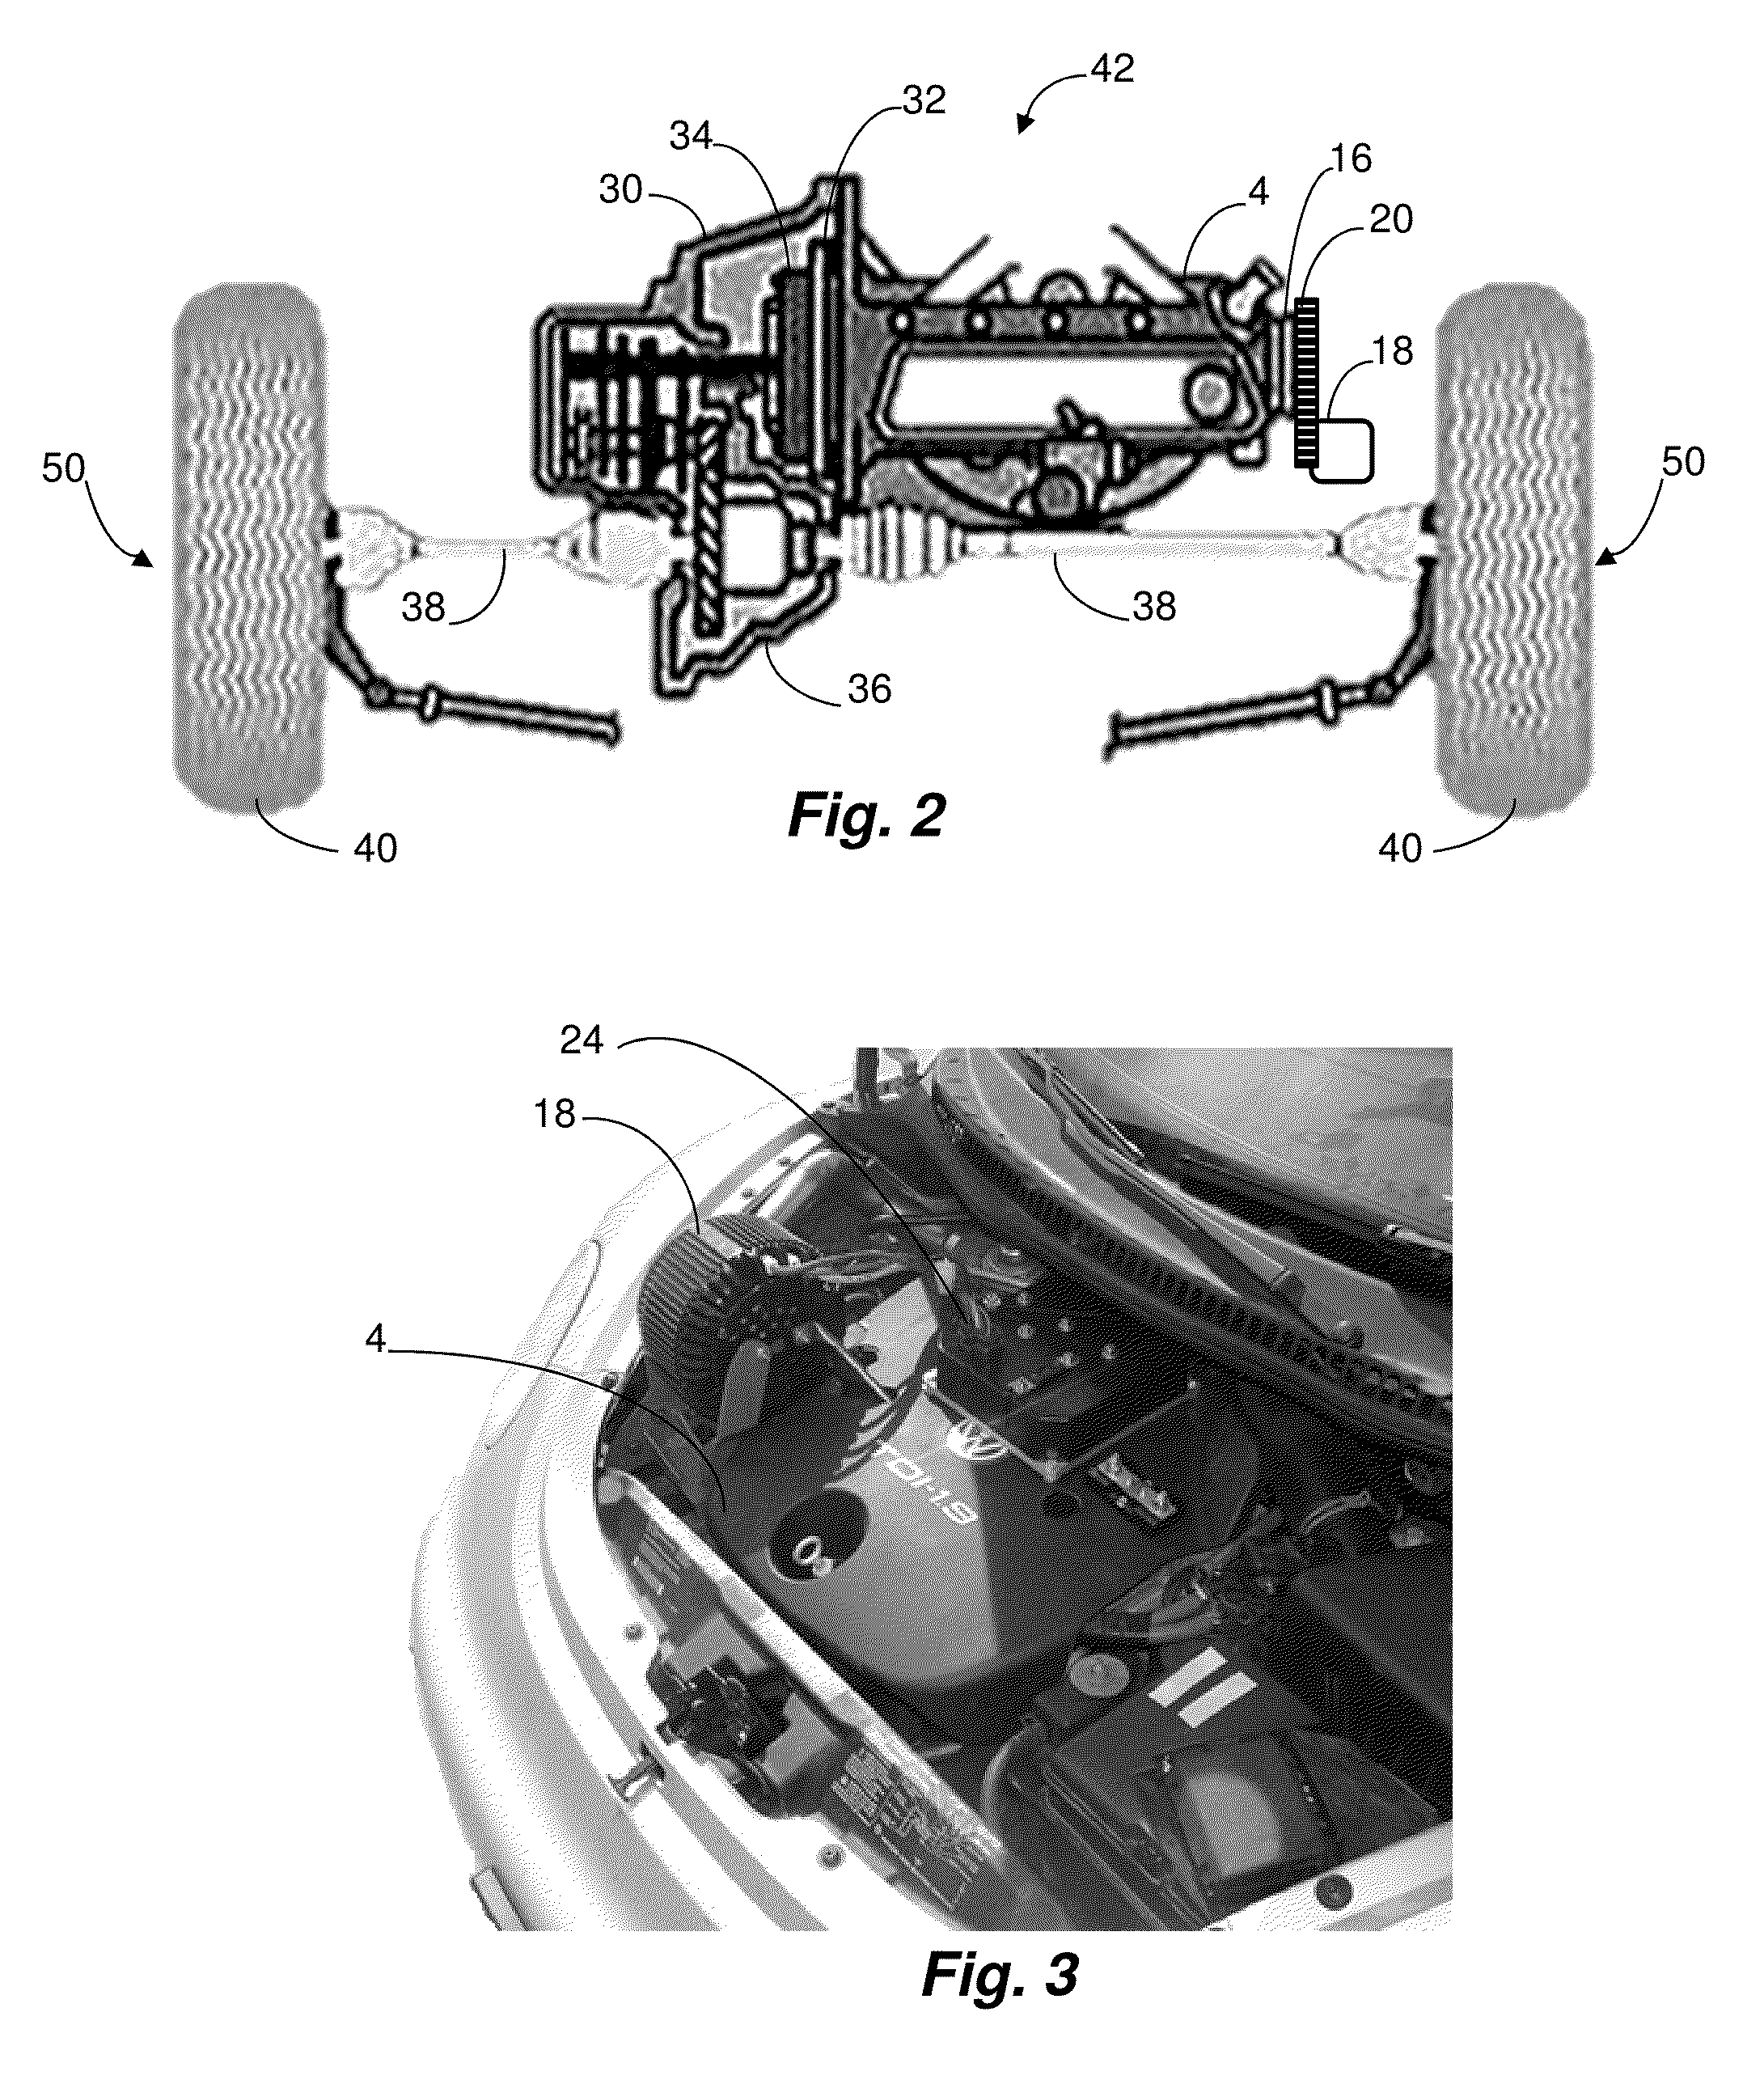 Method and apparatus for assisting an engine or a drive wheel